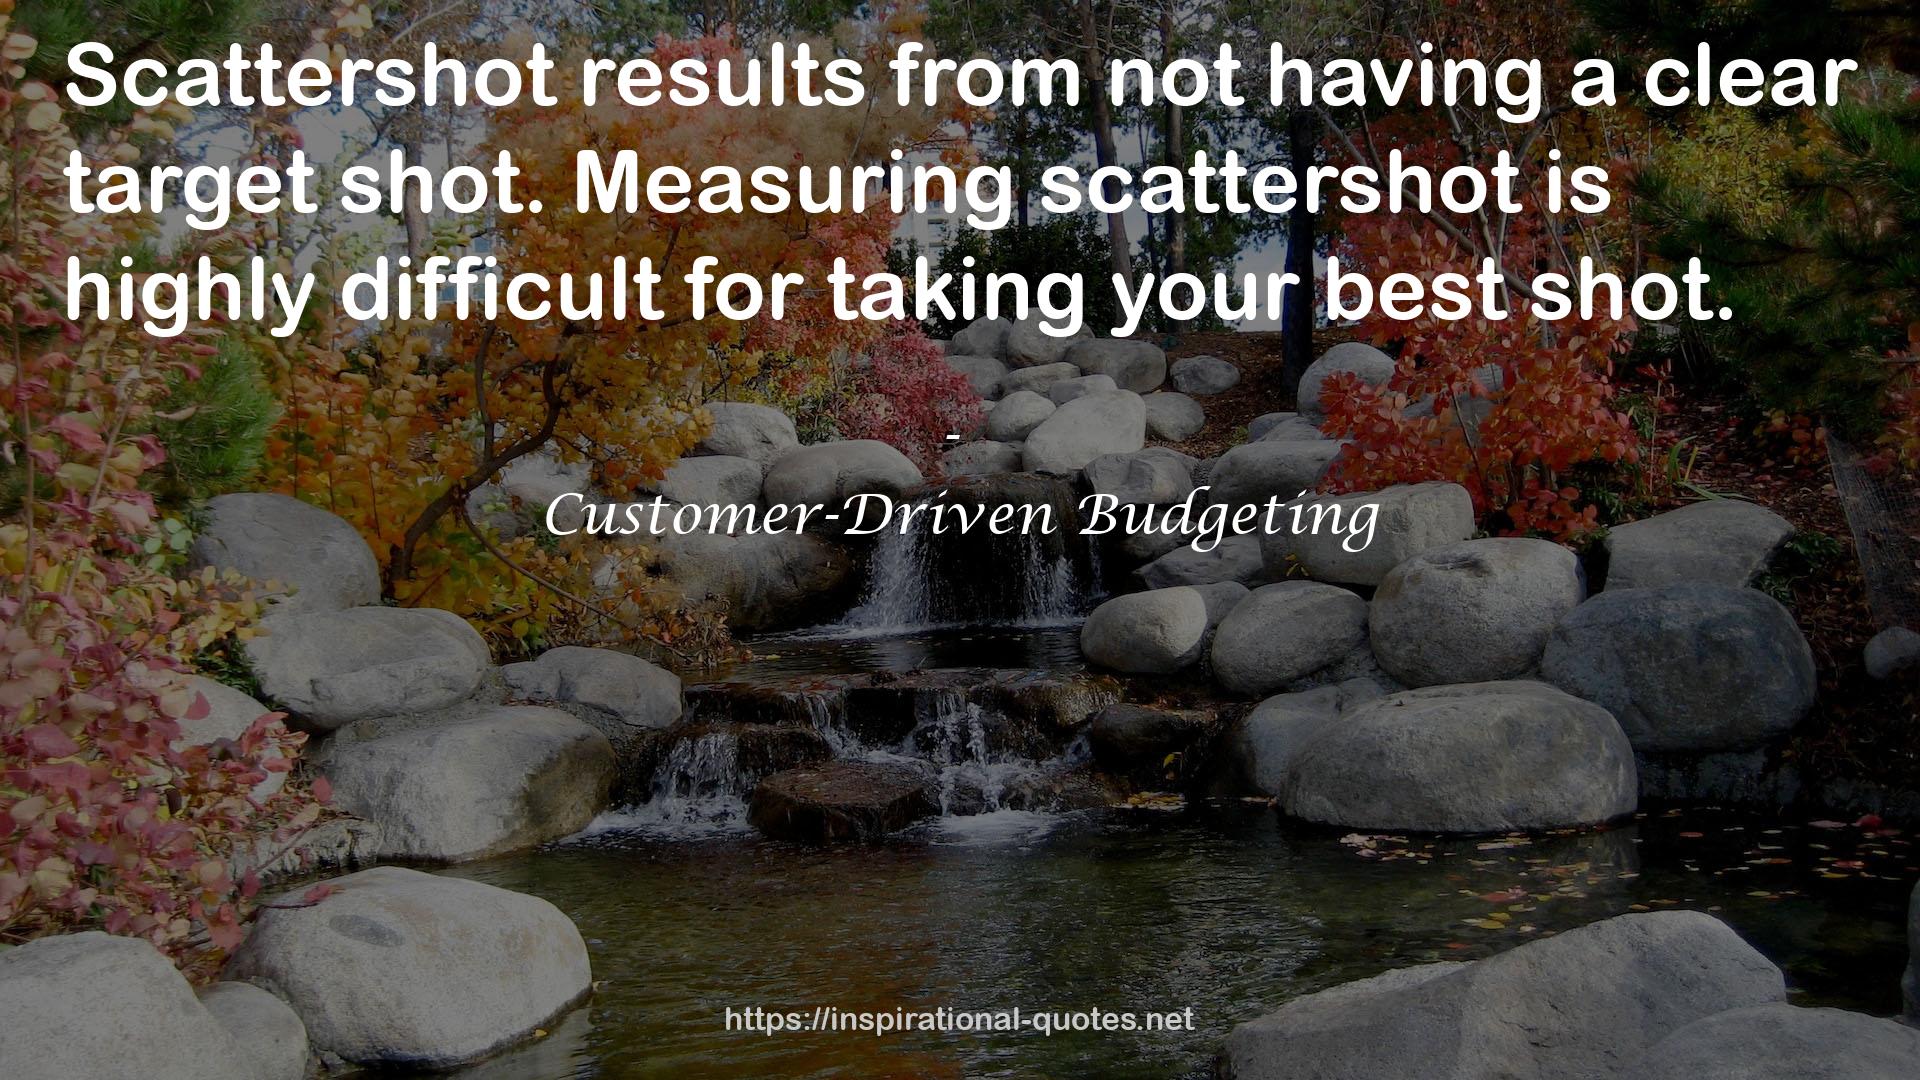 Customer-Driven Budgeting QUOTES